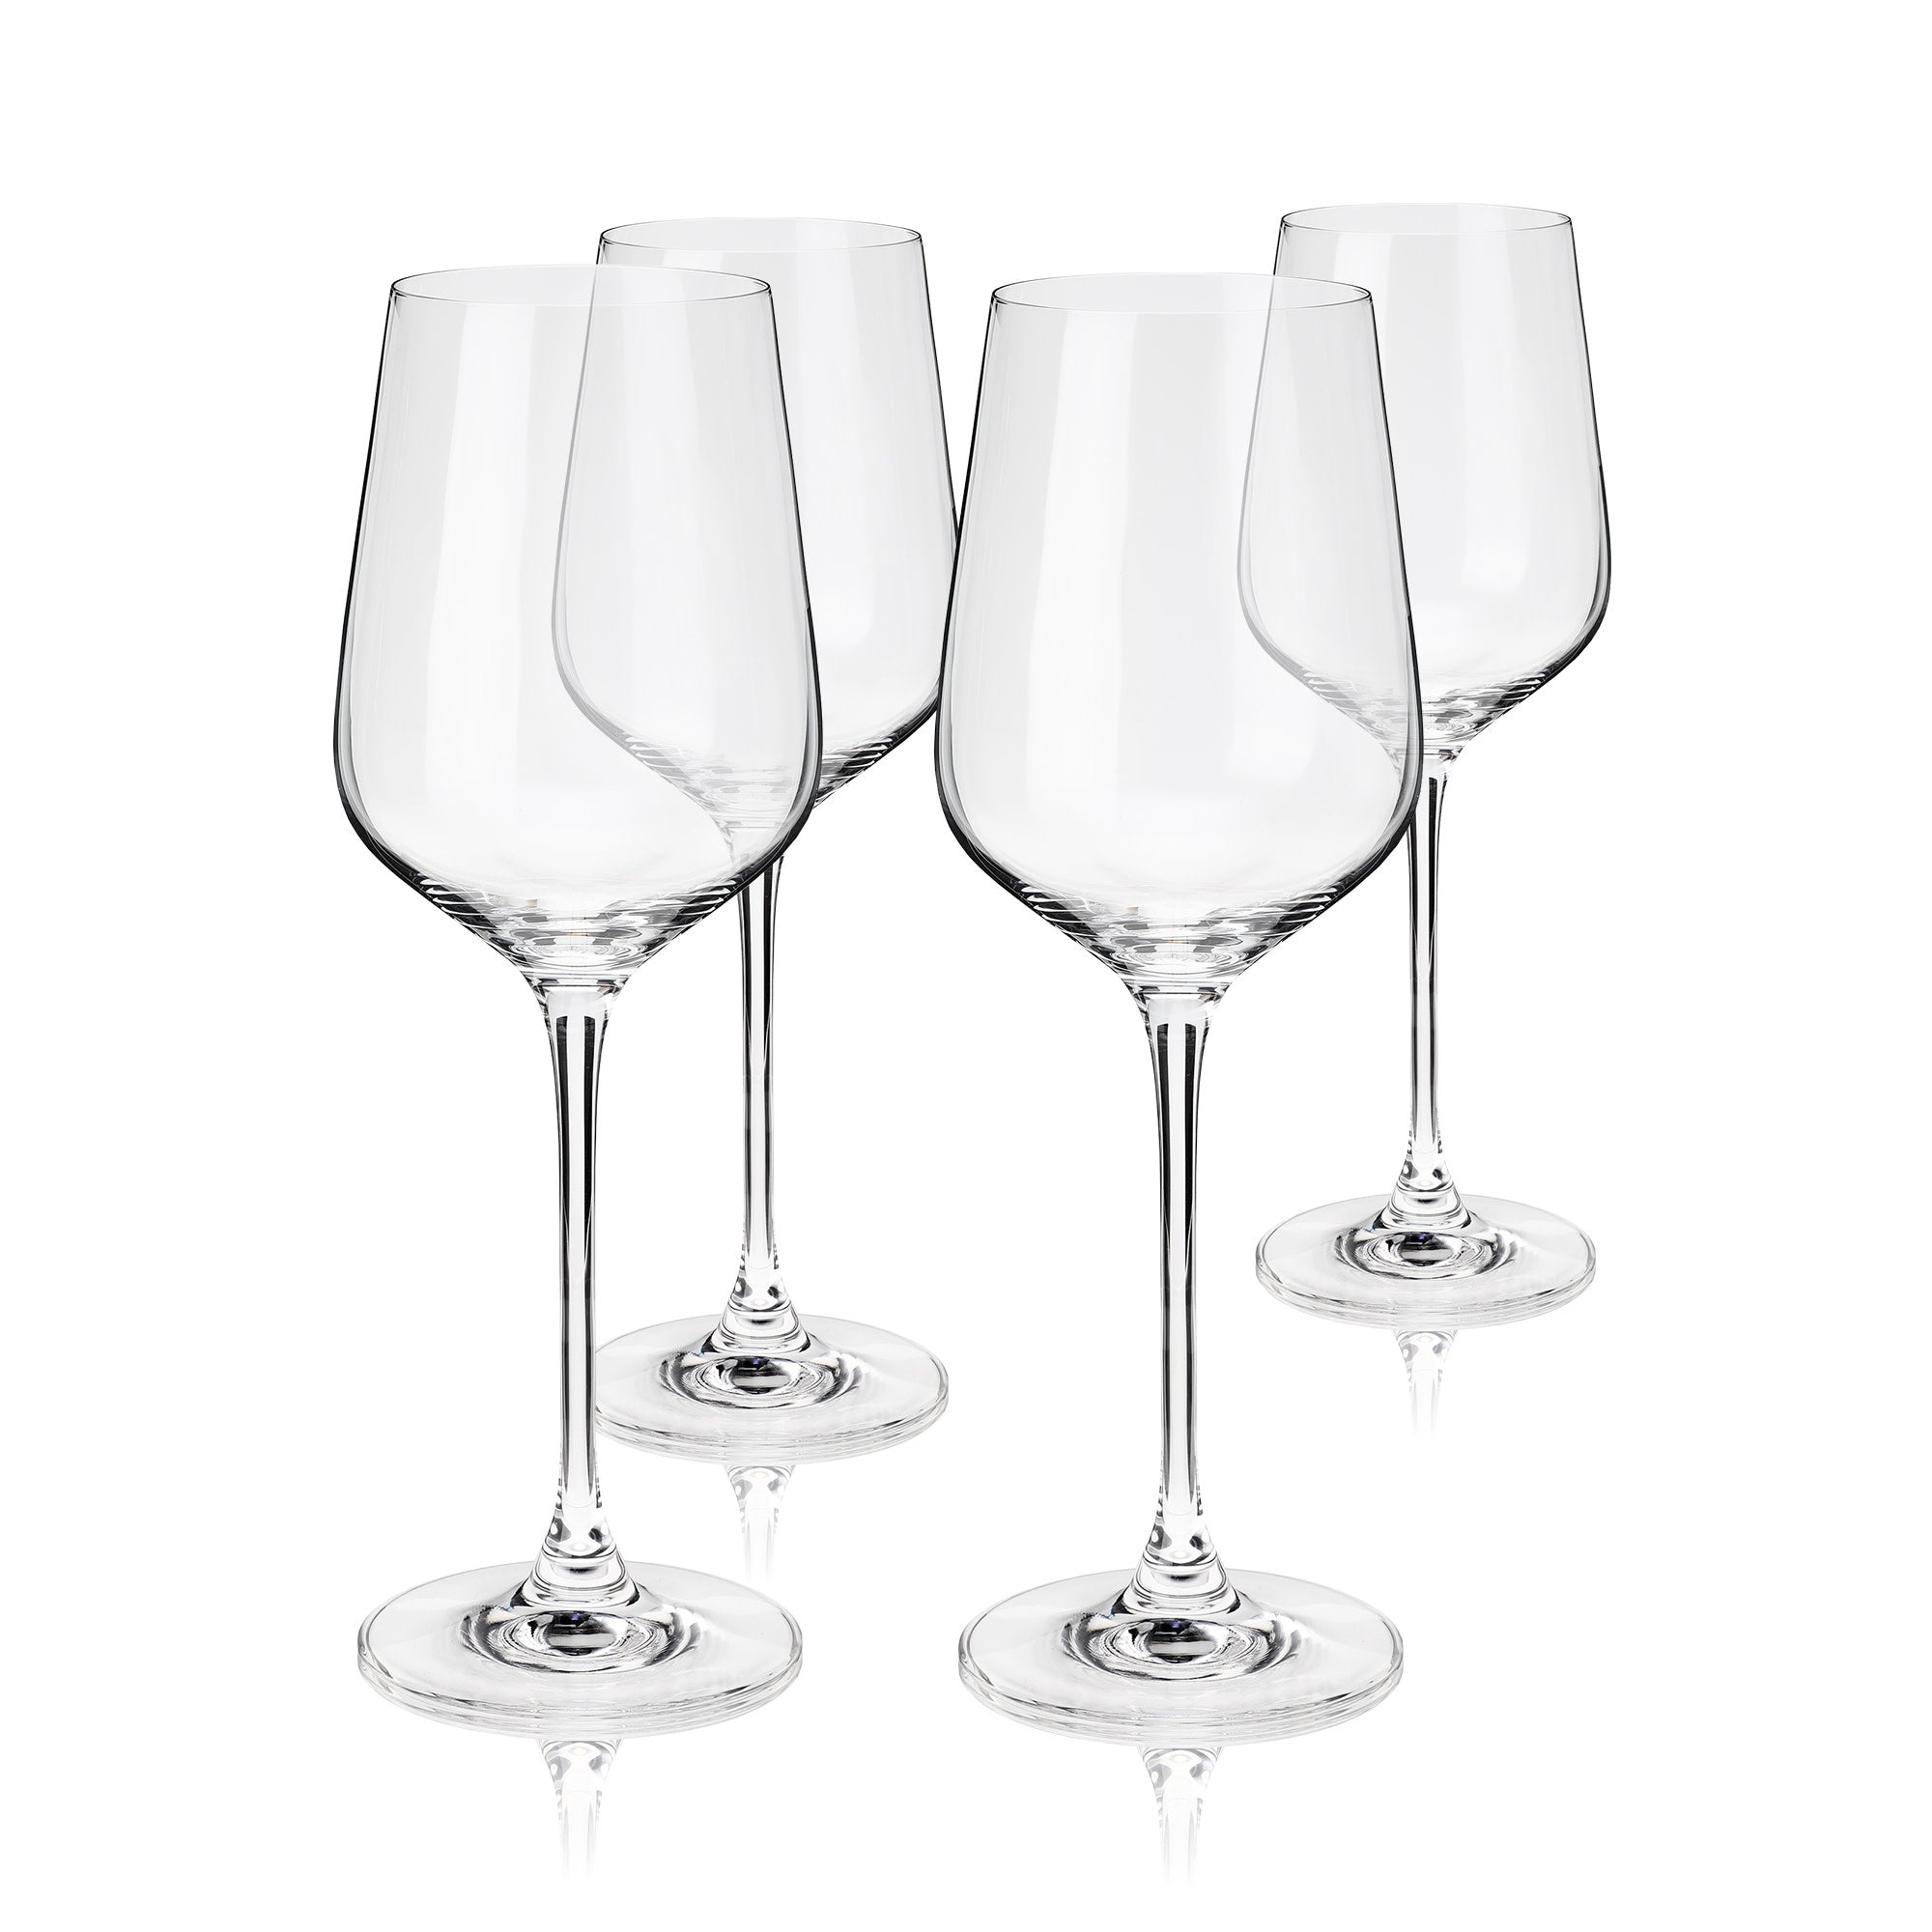 Viski Reserve Inez Crystal Chardonnay Glasses - European Crafted White Wine  Glasses Set of 4 - 6oz Stemmed Chardonnay Wine Glass for Wedding or  Anniversary and Special Occasions Gift Ideas